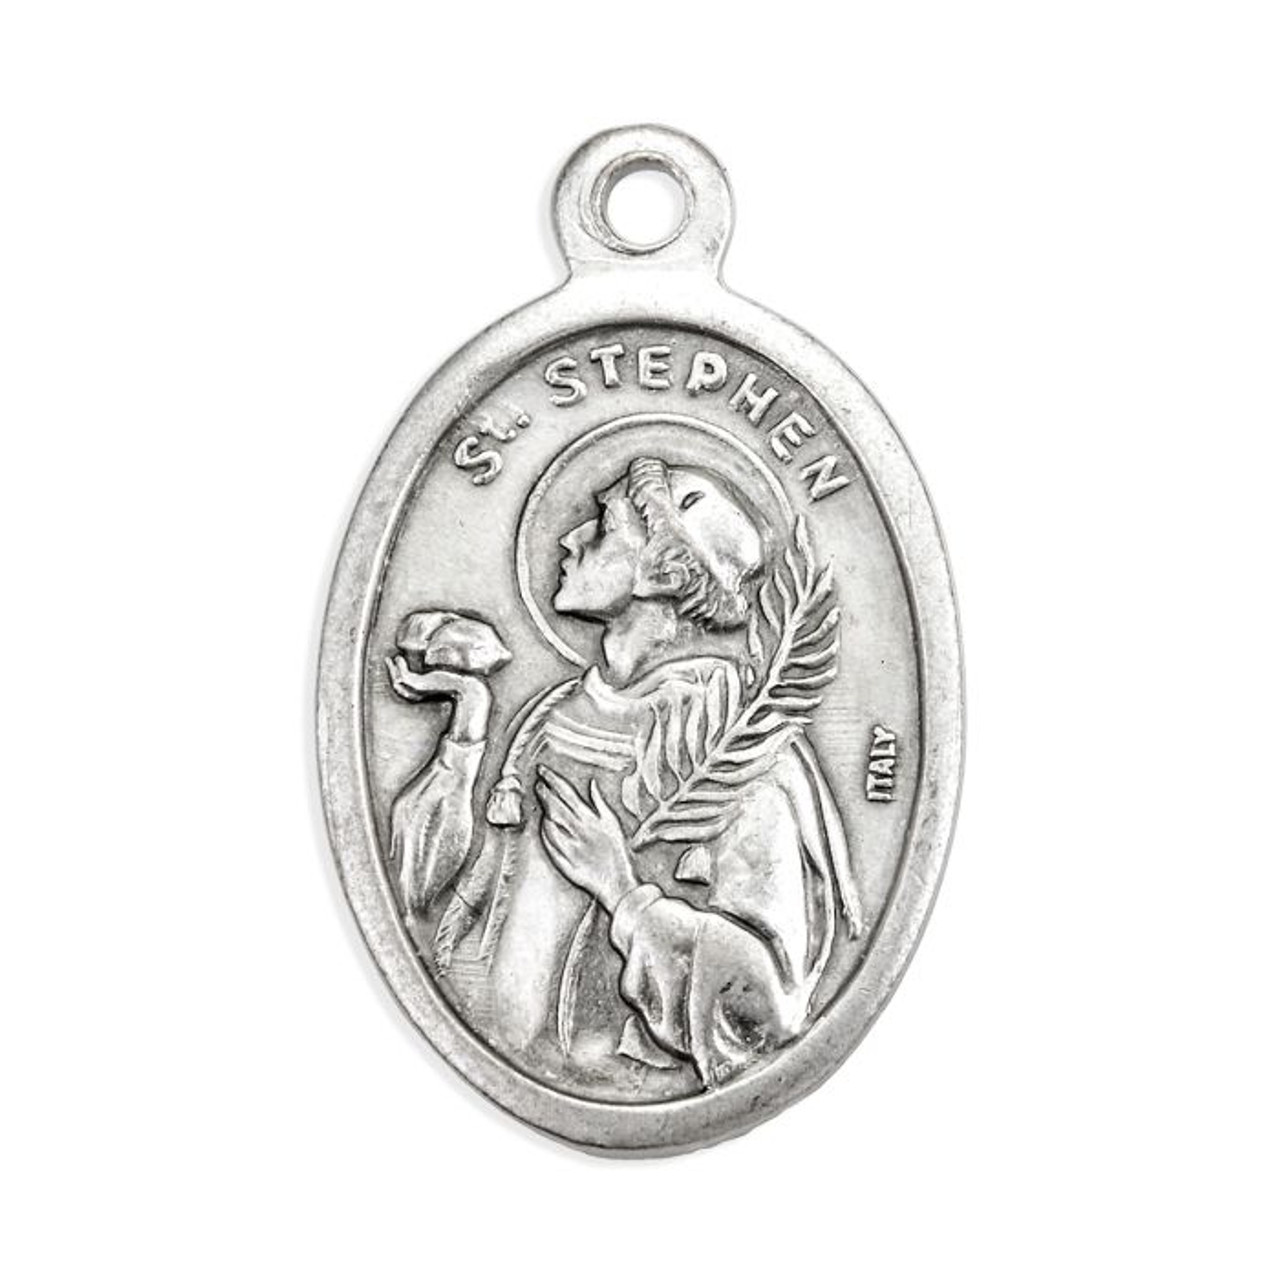 1" Oval Antiqued Silver Oxidized Saint Stephen Medal